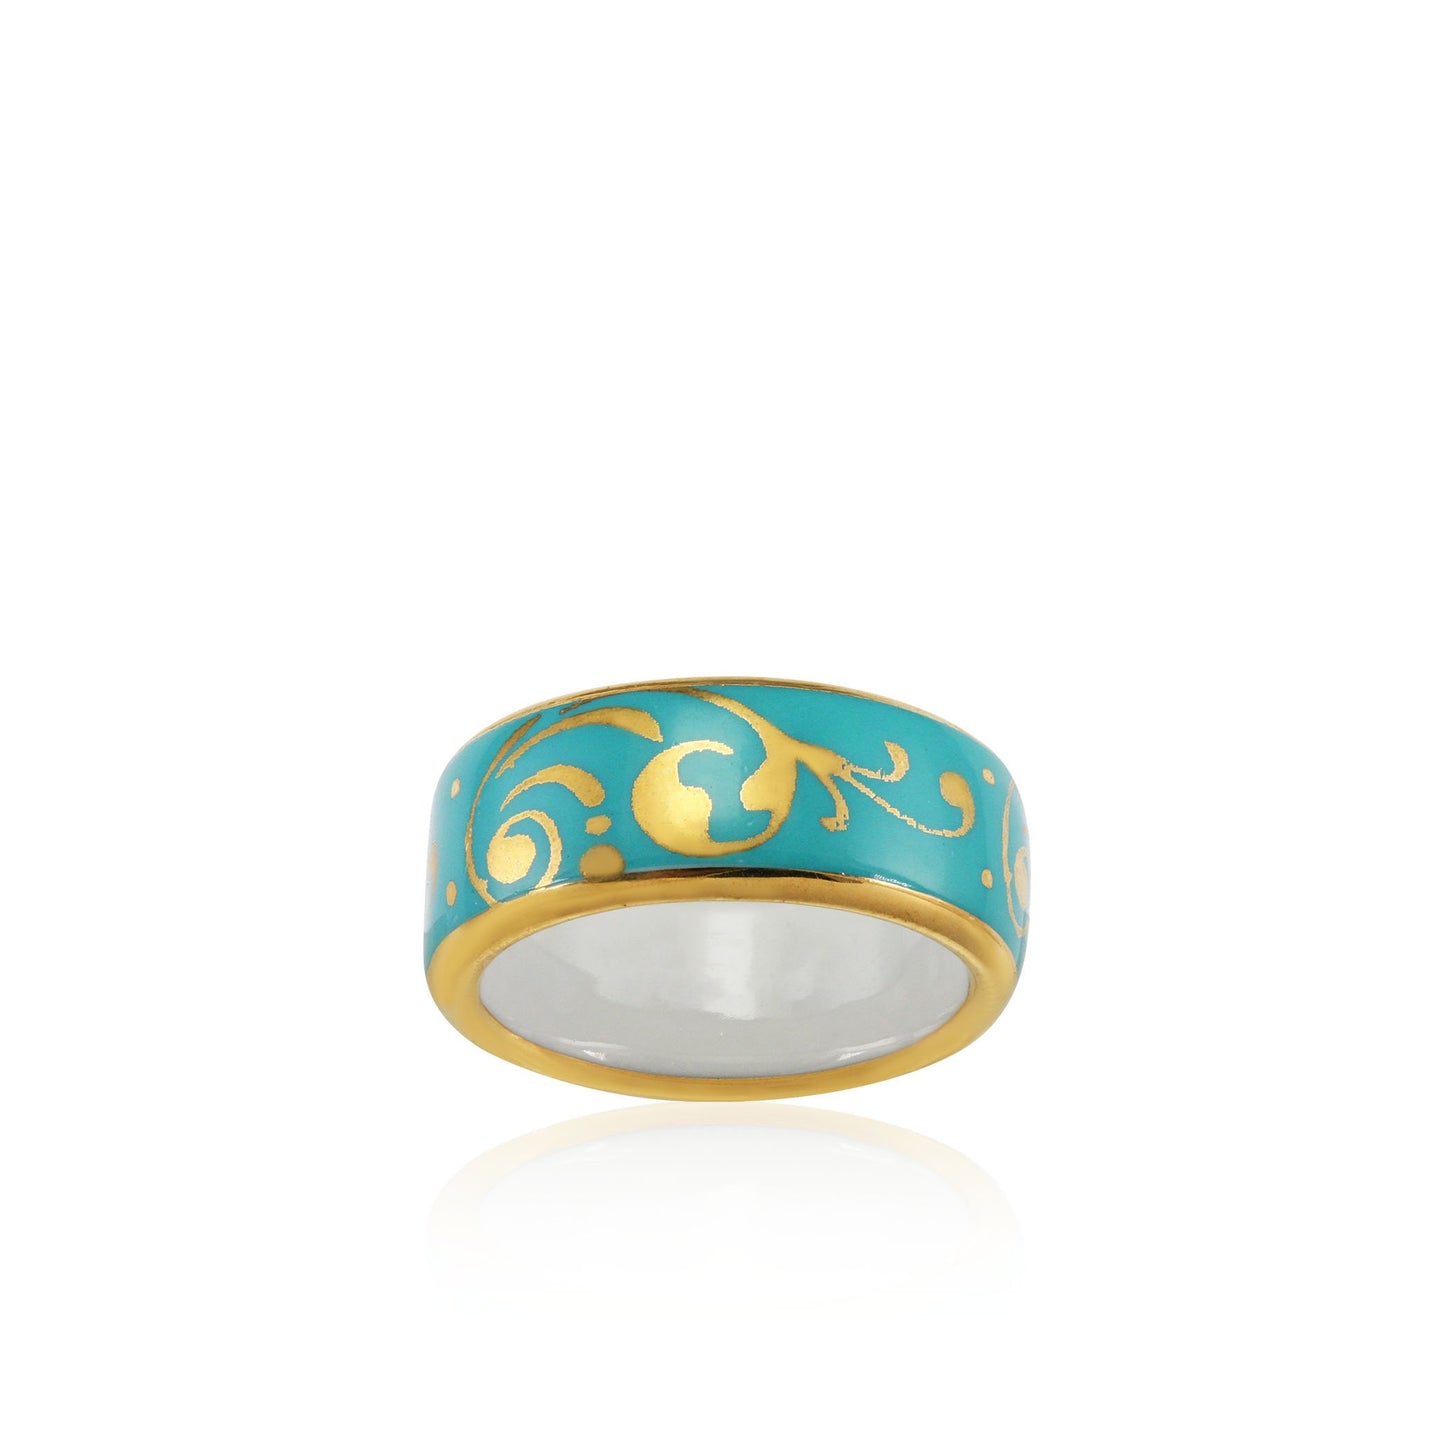 BAROQUE mint green gold plated fine porcelain ring